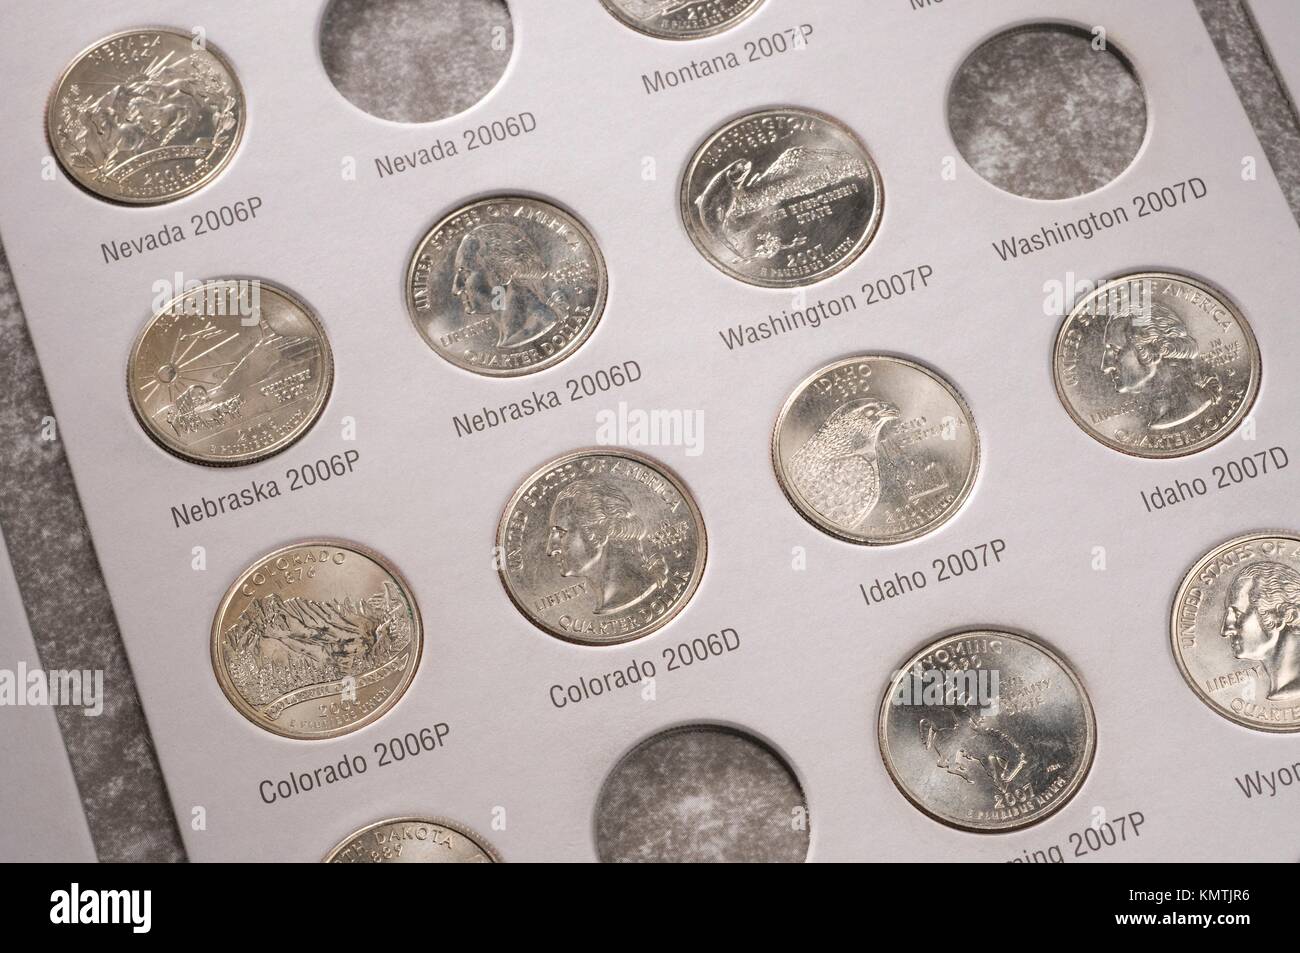 U S state quarters coin collection in book Stock Photo - Alamy